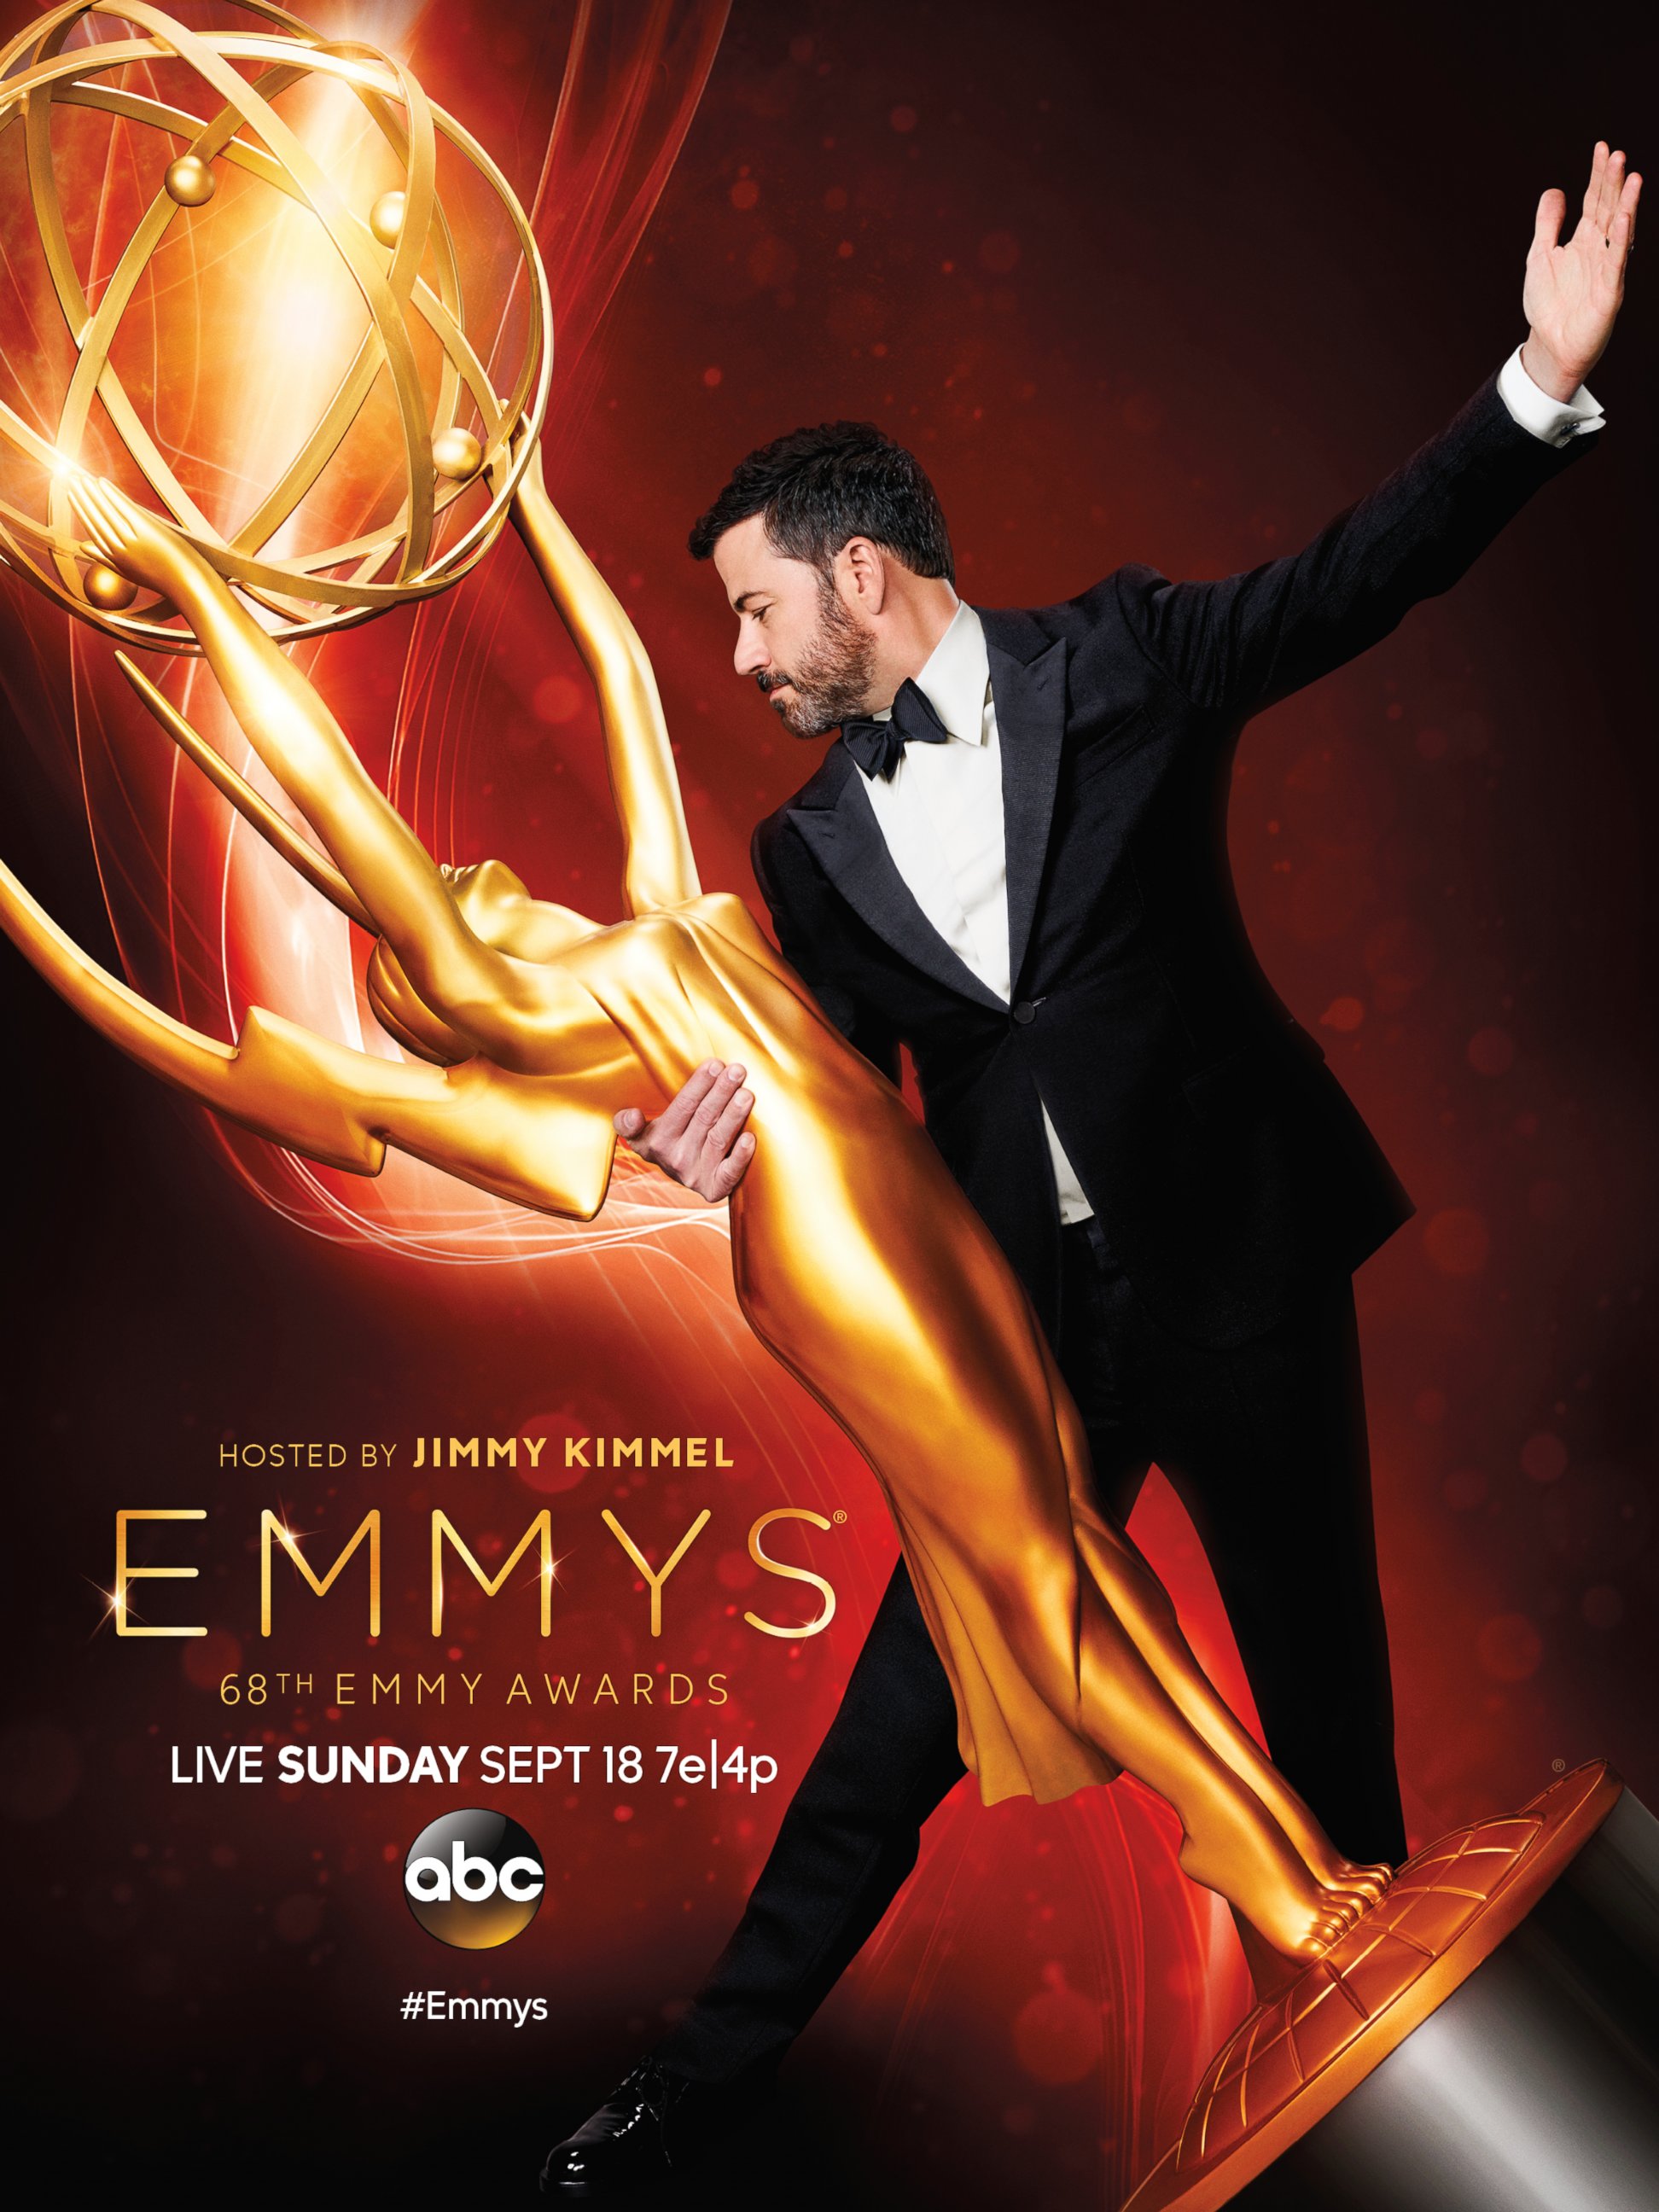 PHOTO: The Emmy nominations countdown is on. The event will be held on Sunday, Sept. 18, 2016, on ABC and will be hosted by Jimmy Kimmel.